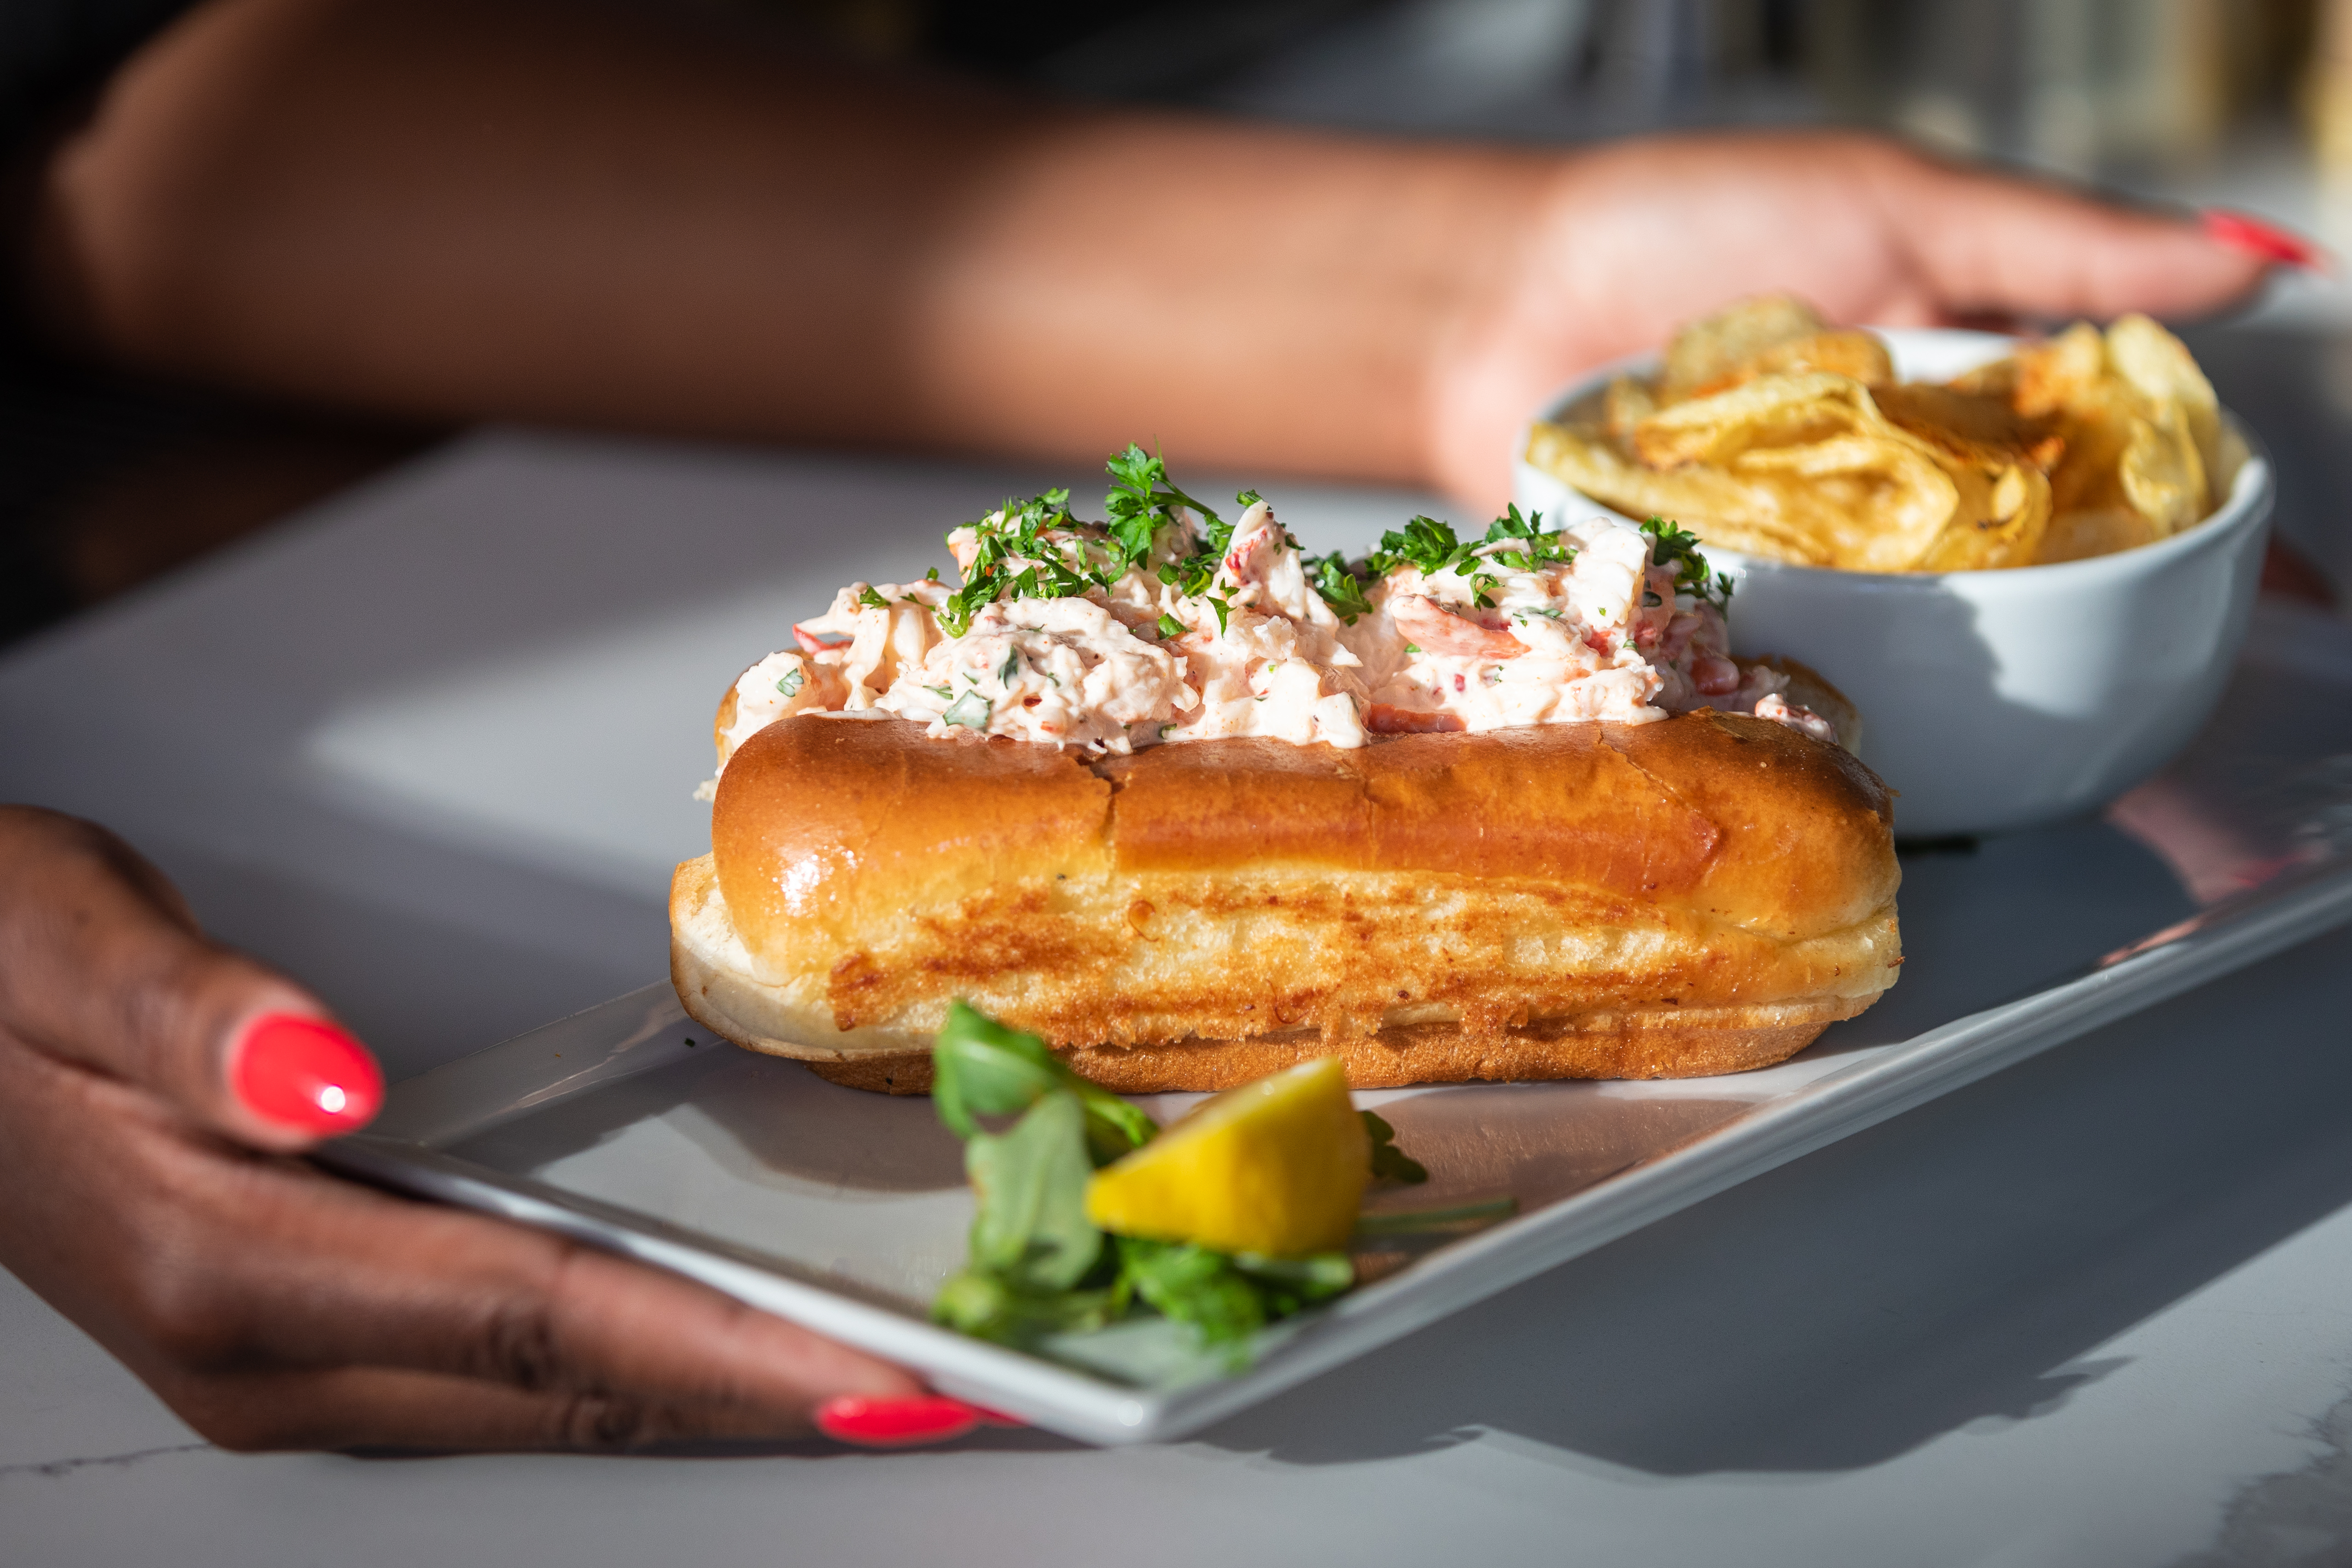 The lobster roll served at The Pearl seafood restaurant in Boston.